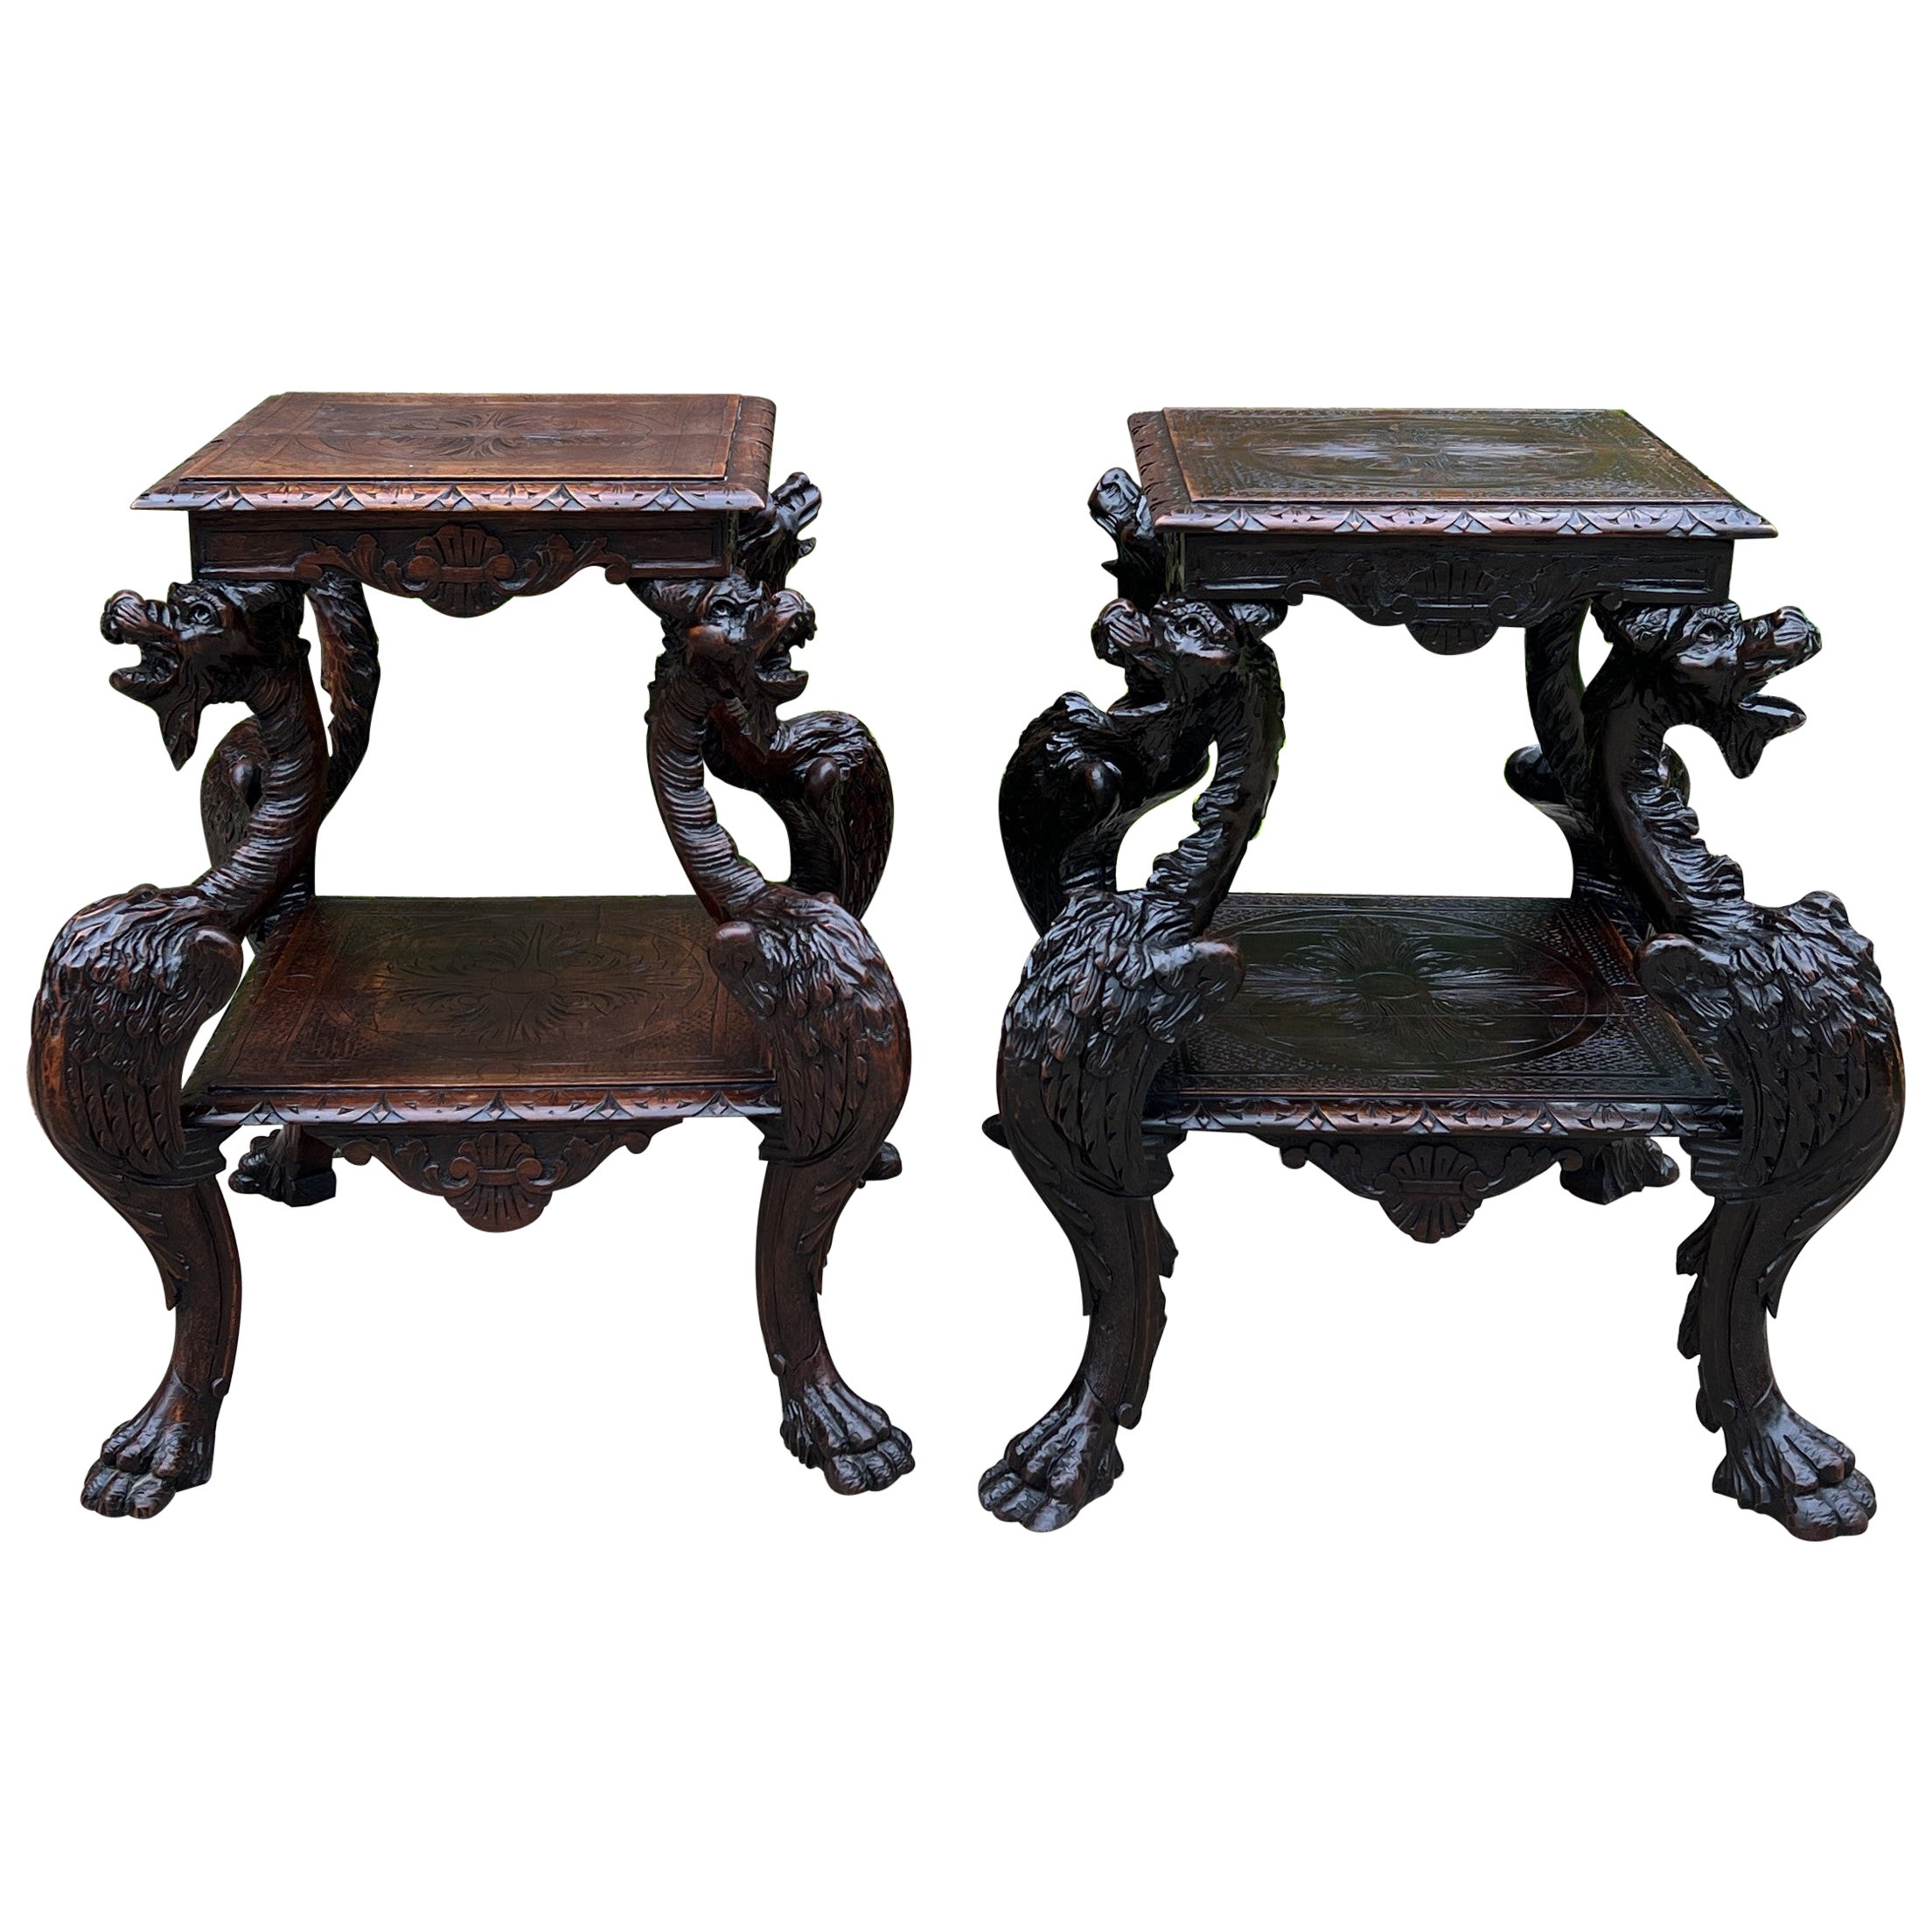 Antique French Pair End Tables Side Tables Nightstands Dragons Oak Gothic 19th C For Sale